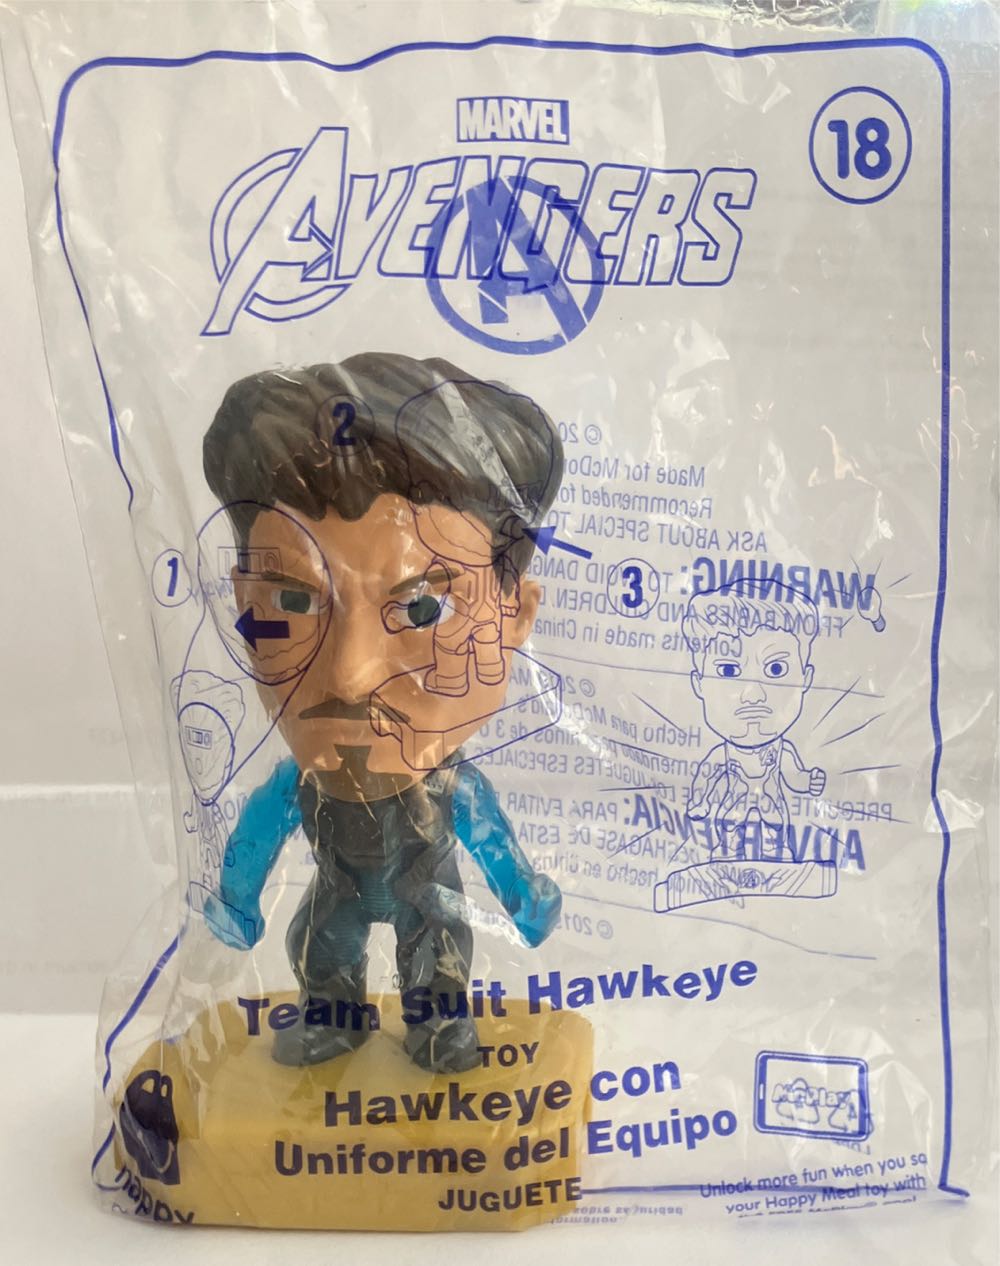 18 - Hawkeye w Team Suit  (McDonald’s Avengers) action figure collectible - Main Image 1